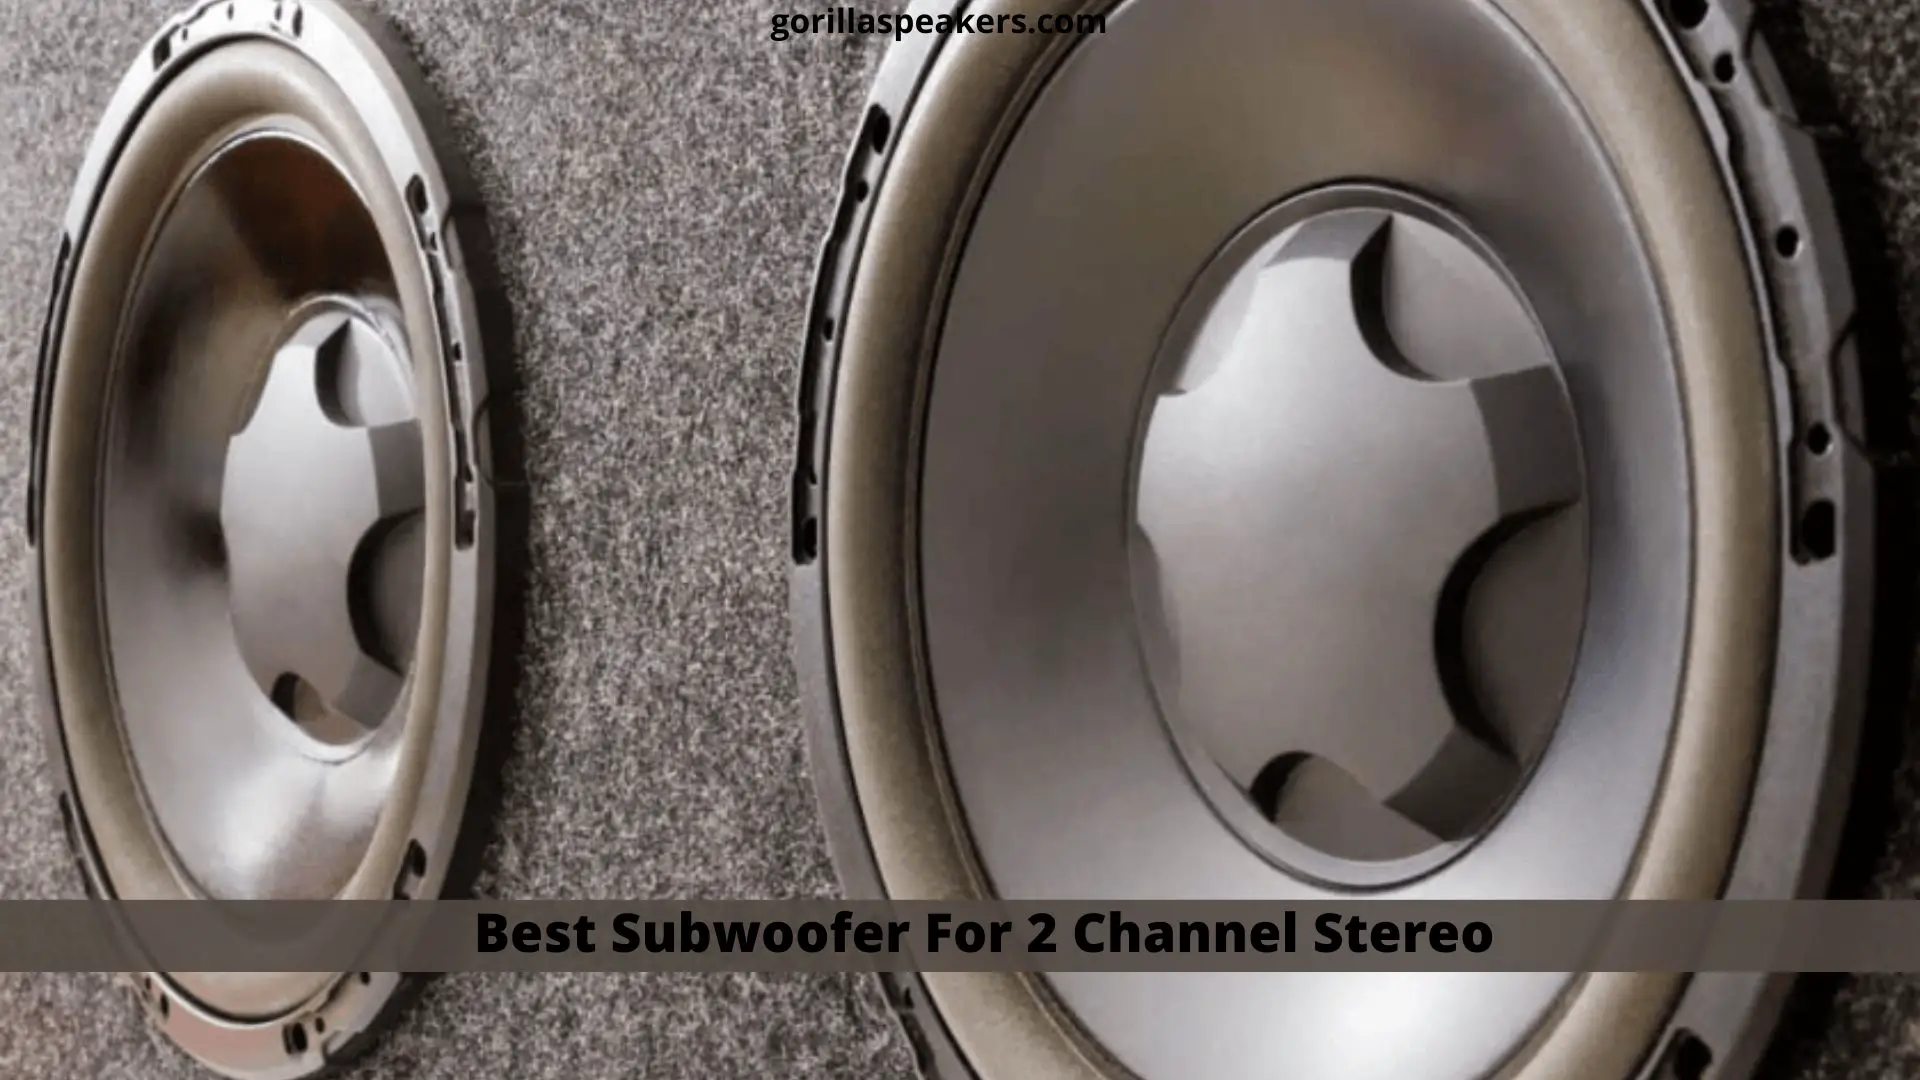 Best Subwoofer For 2 Channel Stereo